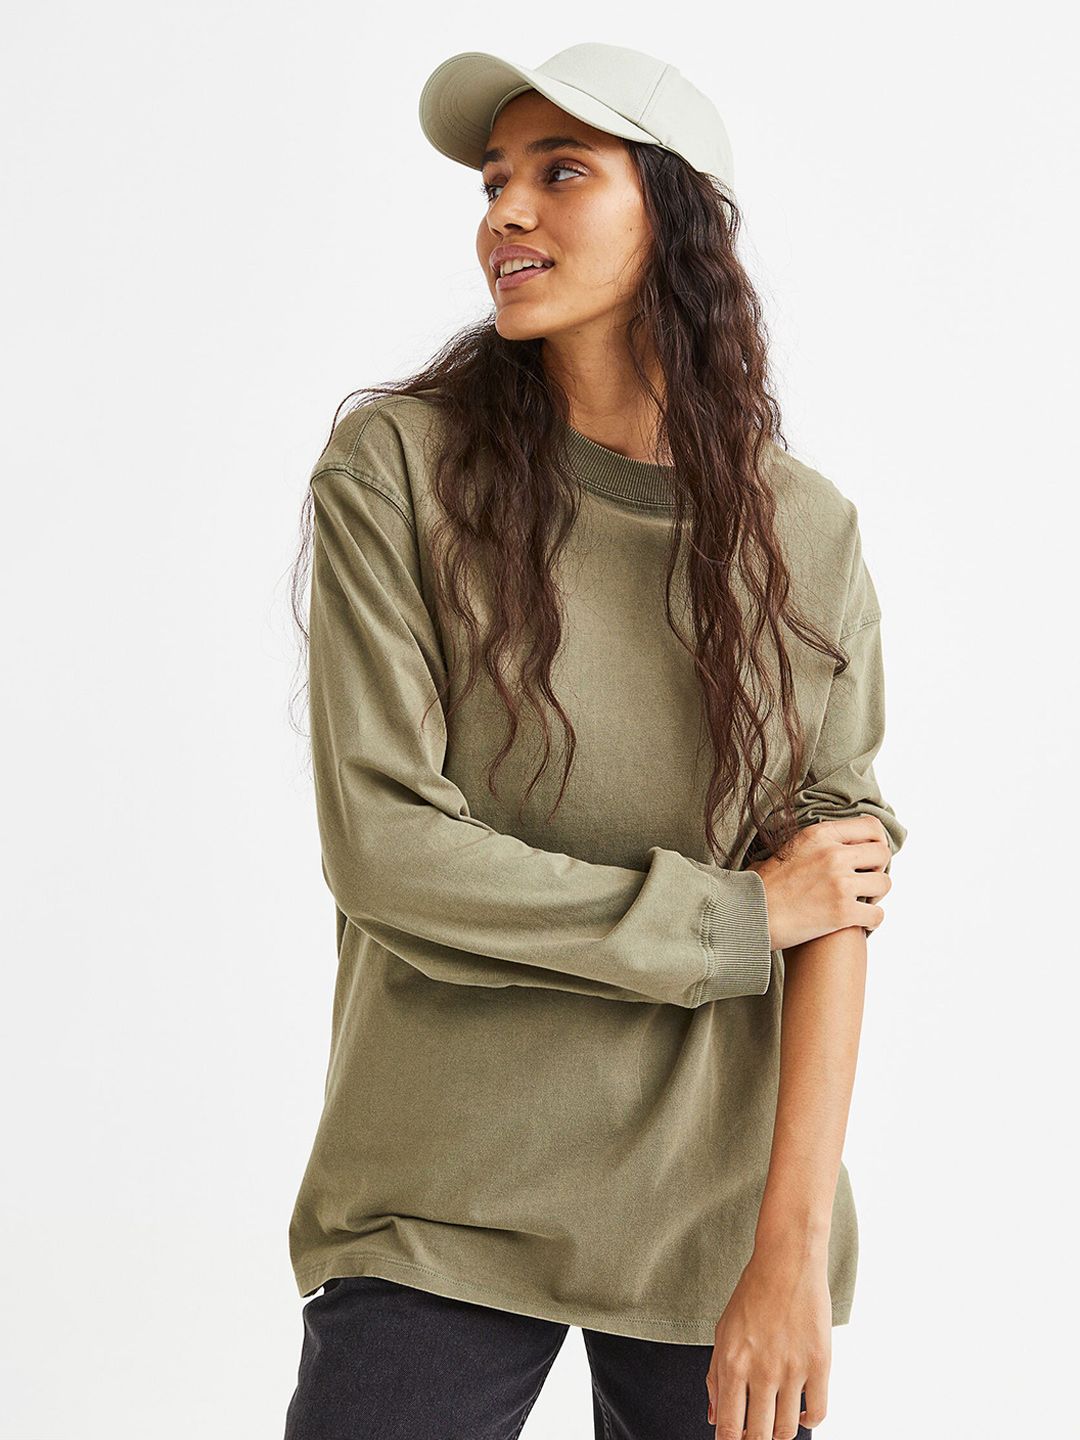 H&M Women Long-Sleeved Jersey Top Price in India